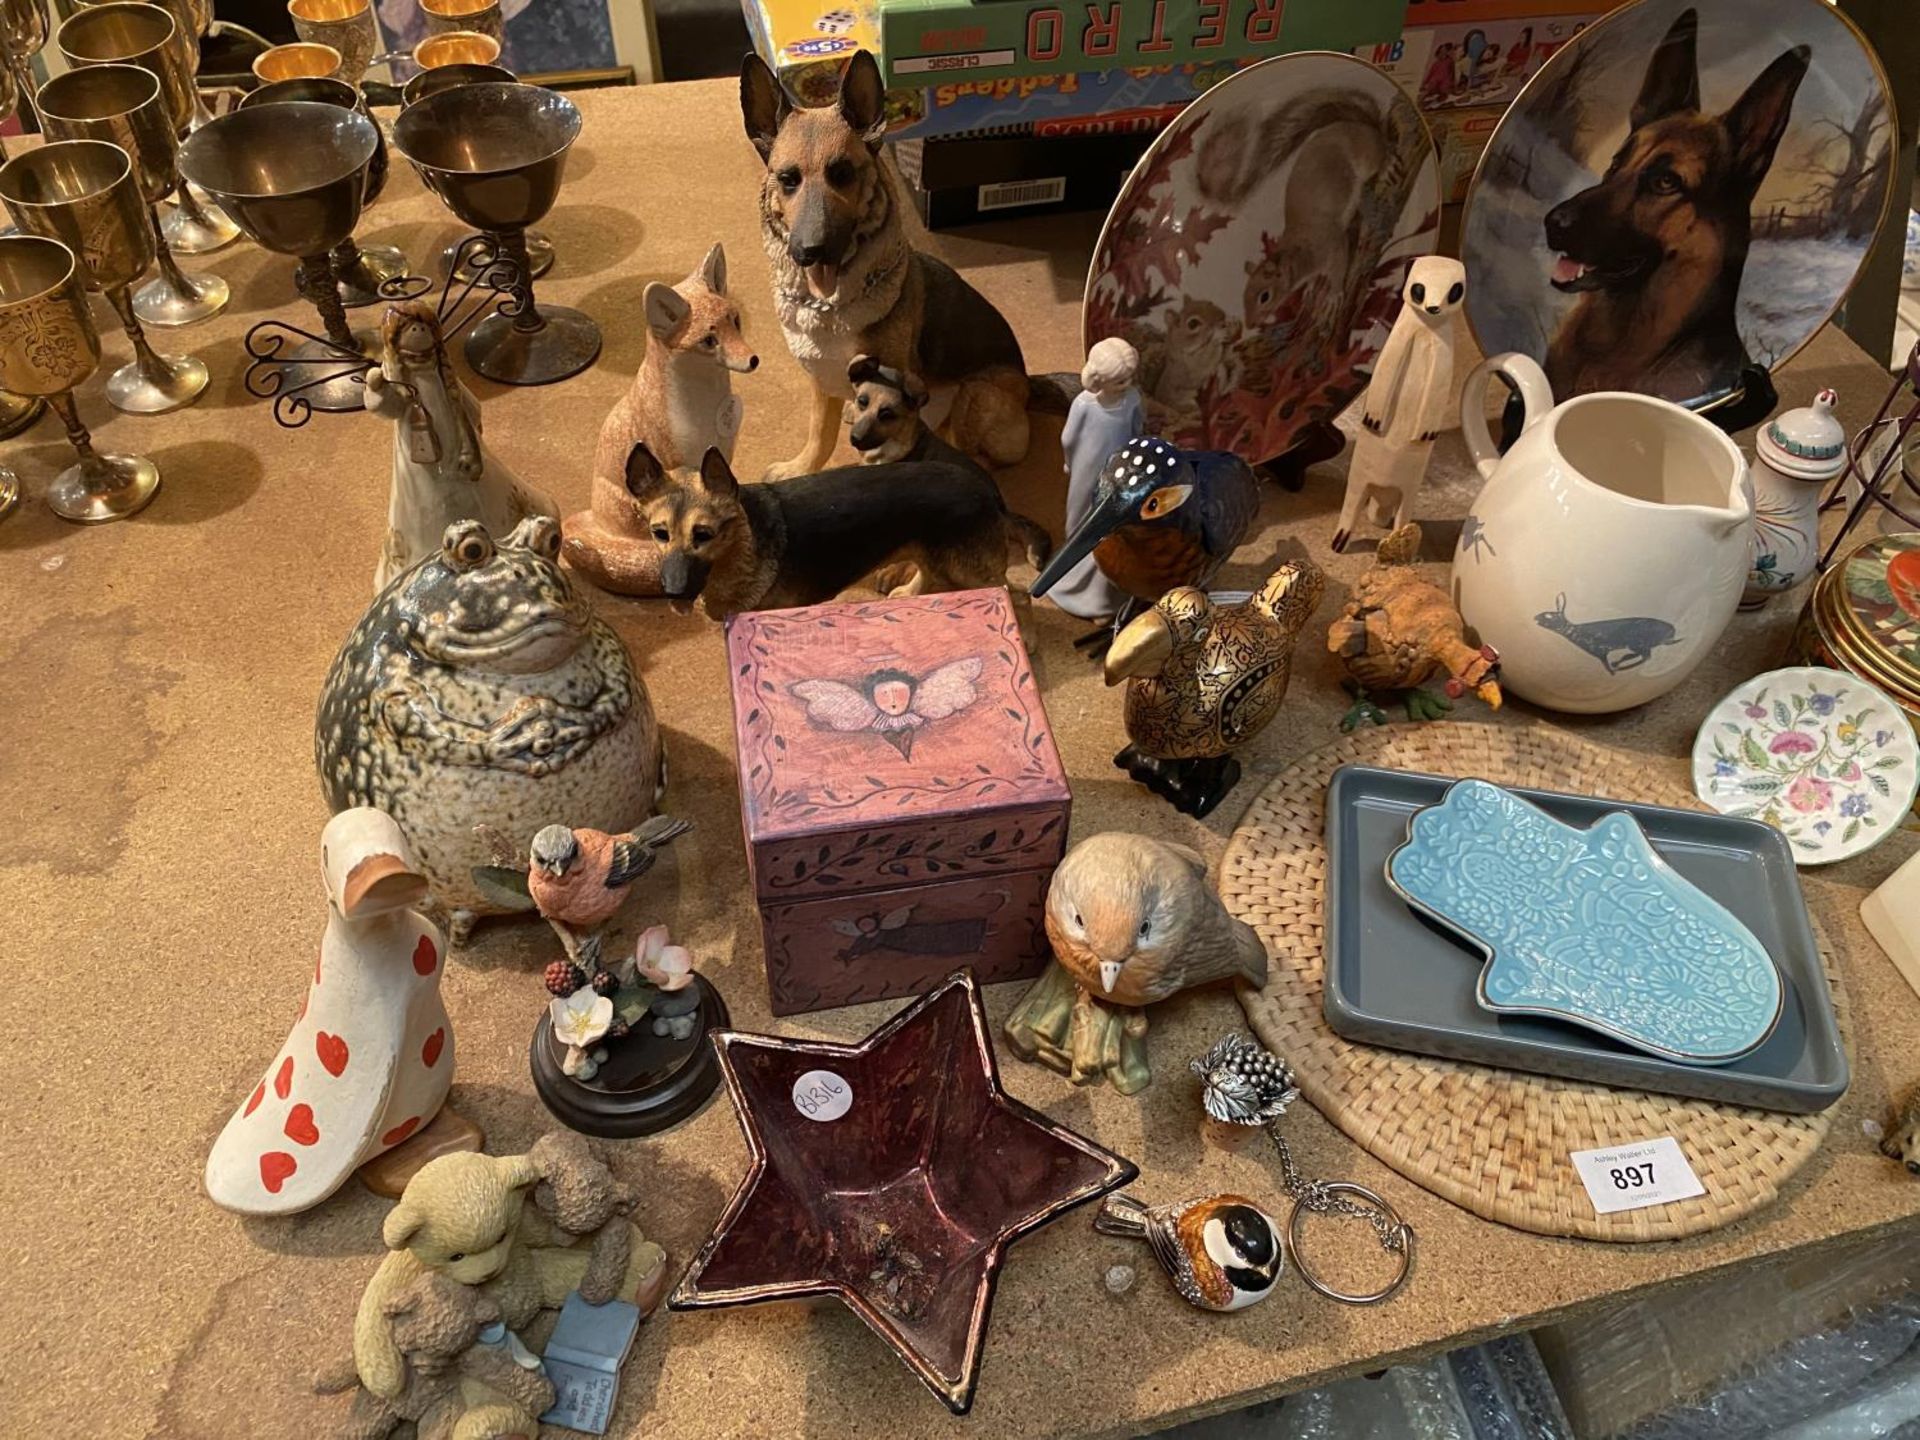 A LARGE COLLECTION OF ITEMS TO INCLUDE SEVERAL ANIMAL FIGURINES, DECORATIVE PLATES AND TRINKET - Image 2 of 6